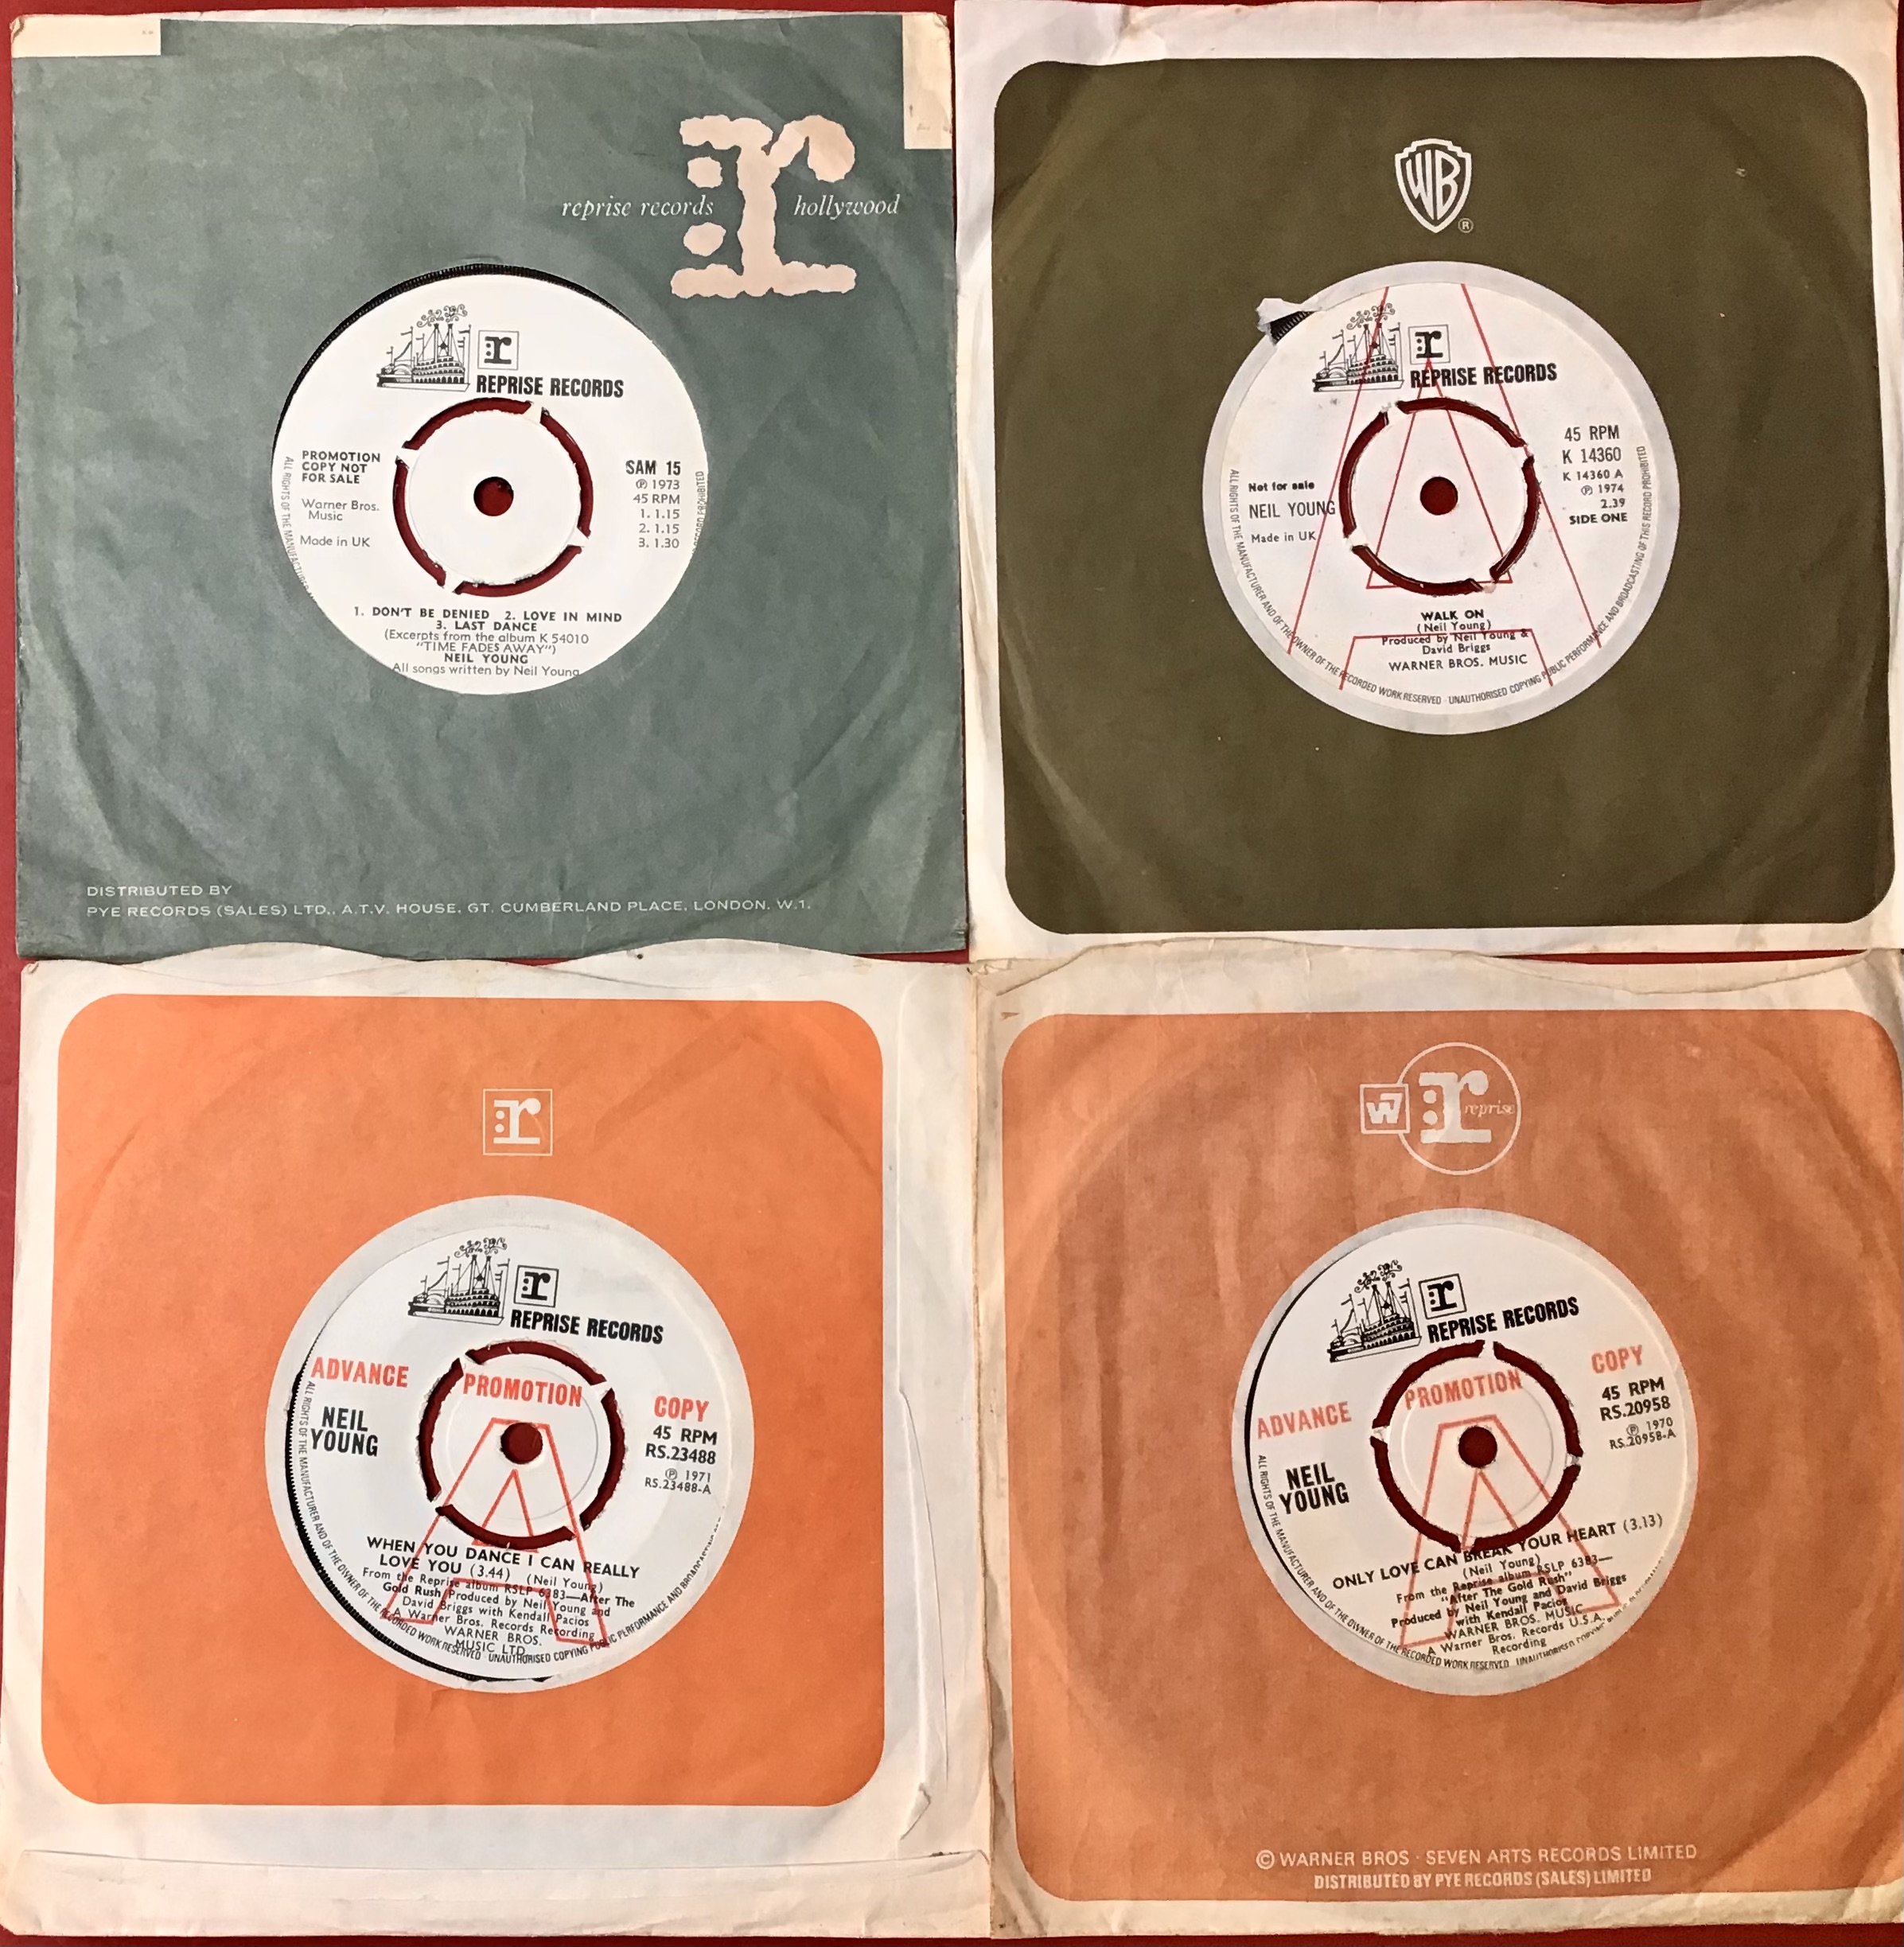 4 NEIL YOUNG DEMO 7" SINGLES. Starting with a one sided single that has 3 tracks on Reprise Sam 15